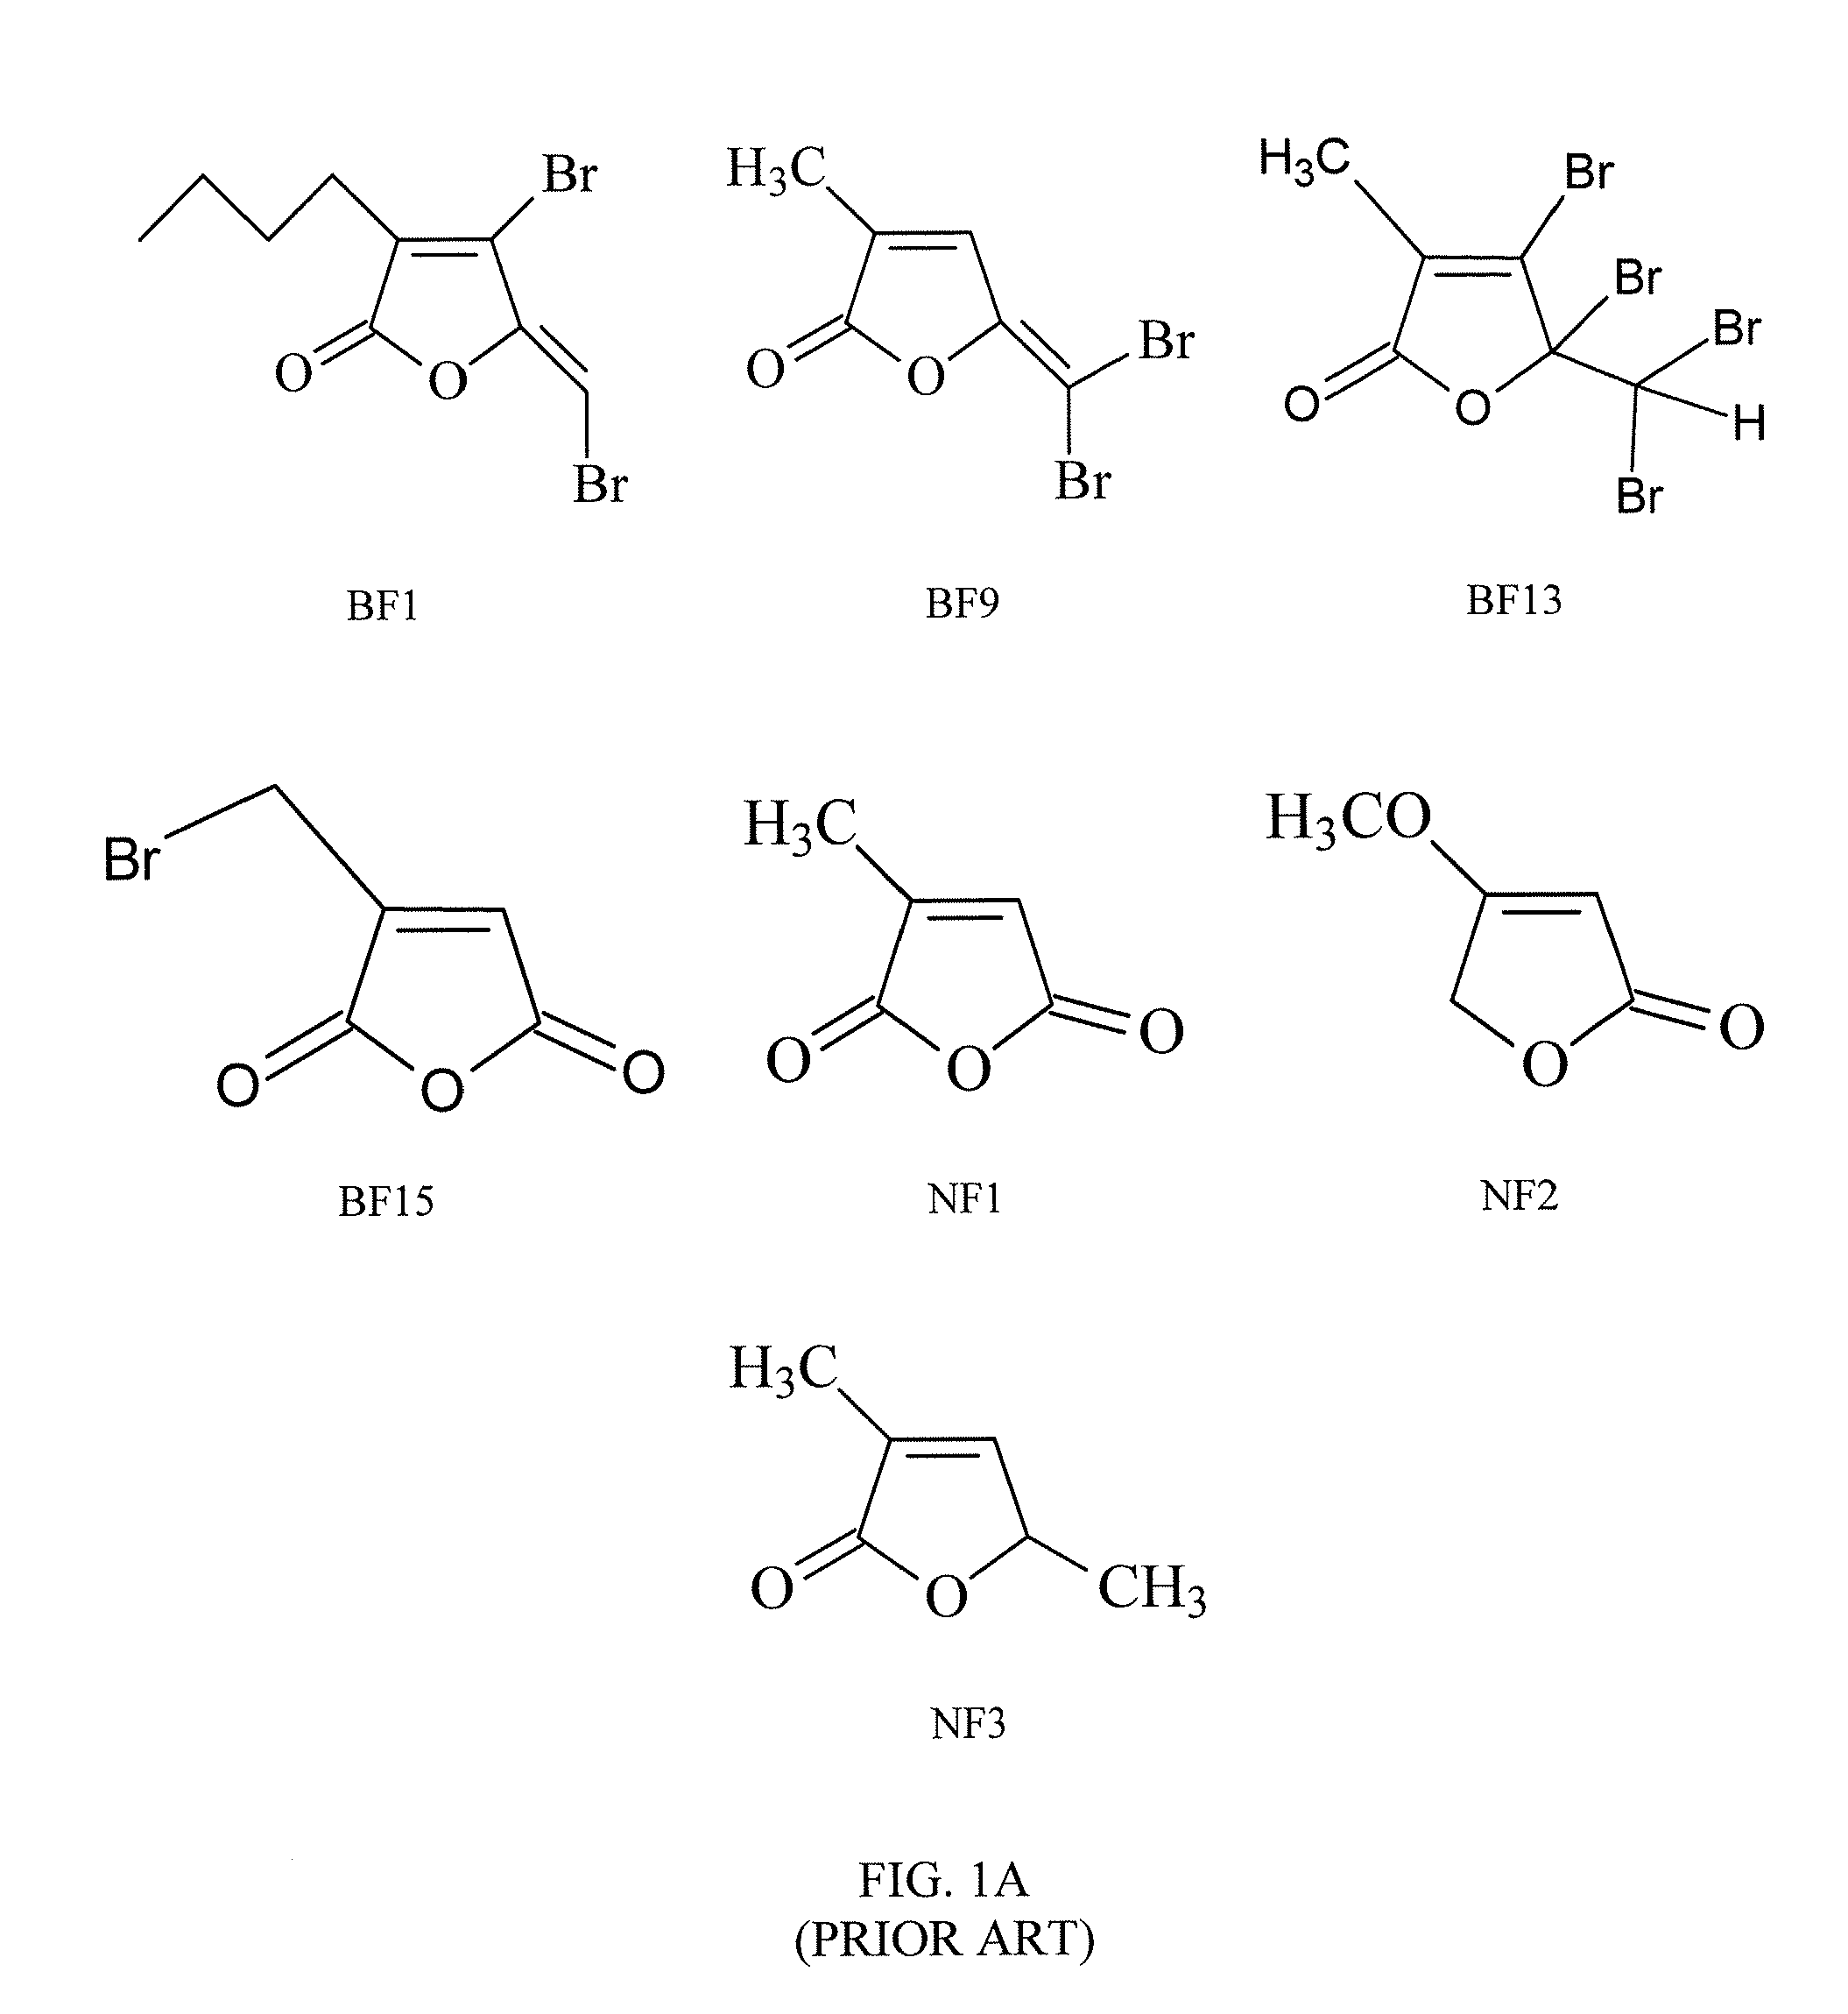 System and method for controlling growth of microorganisms with brominated furanones